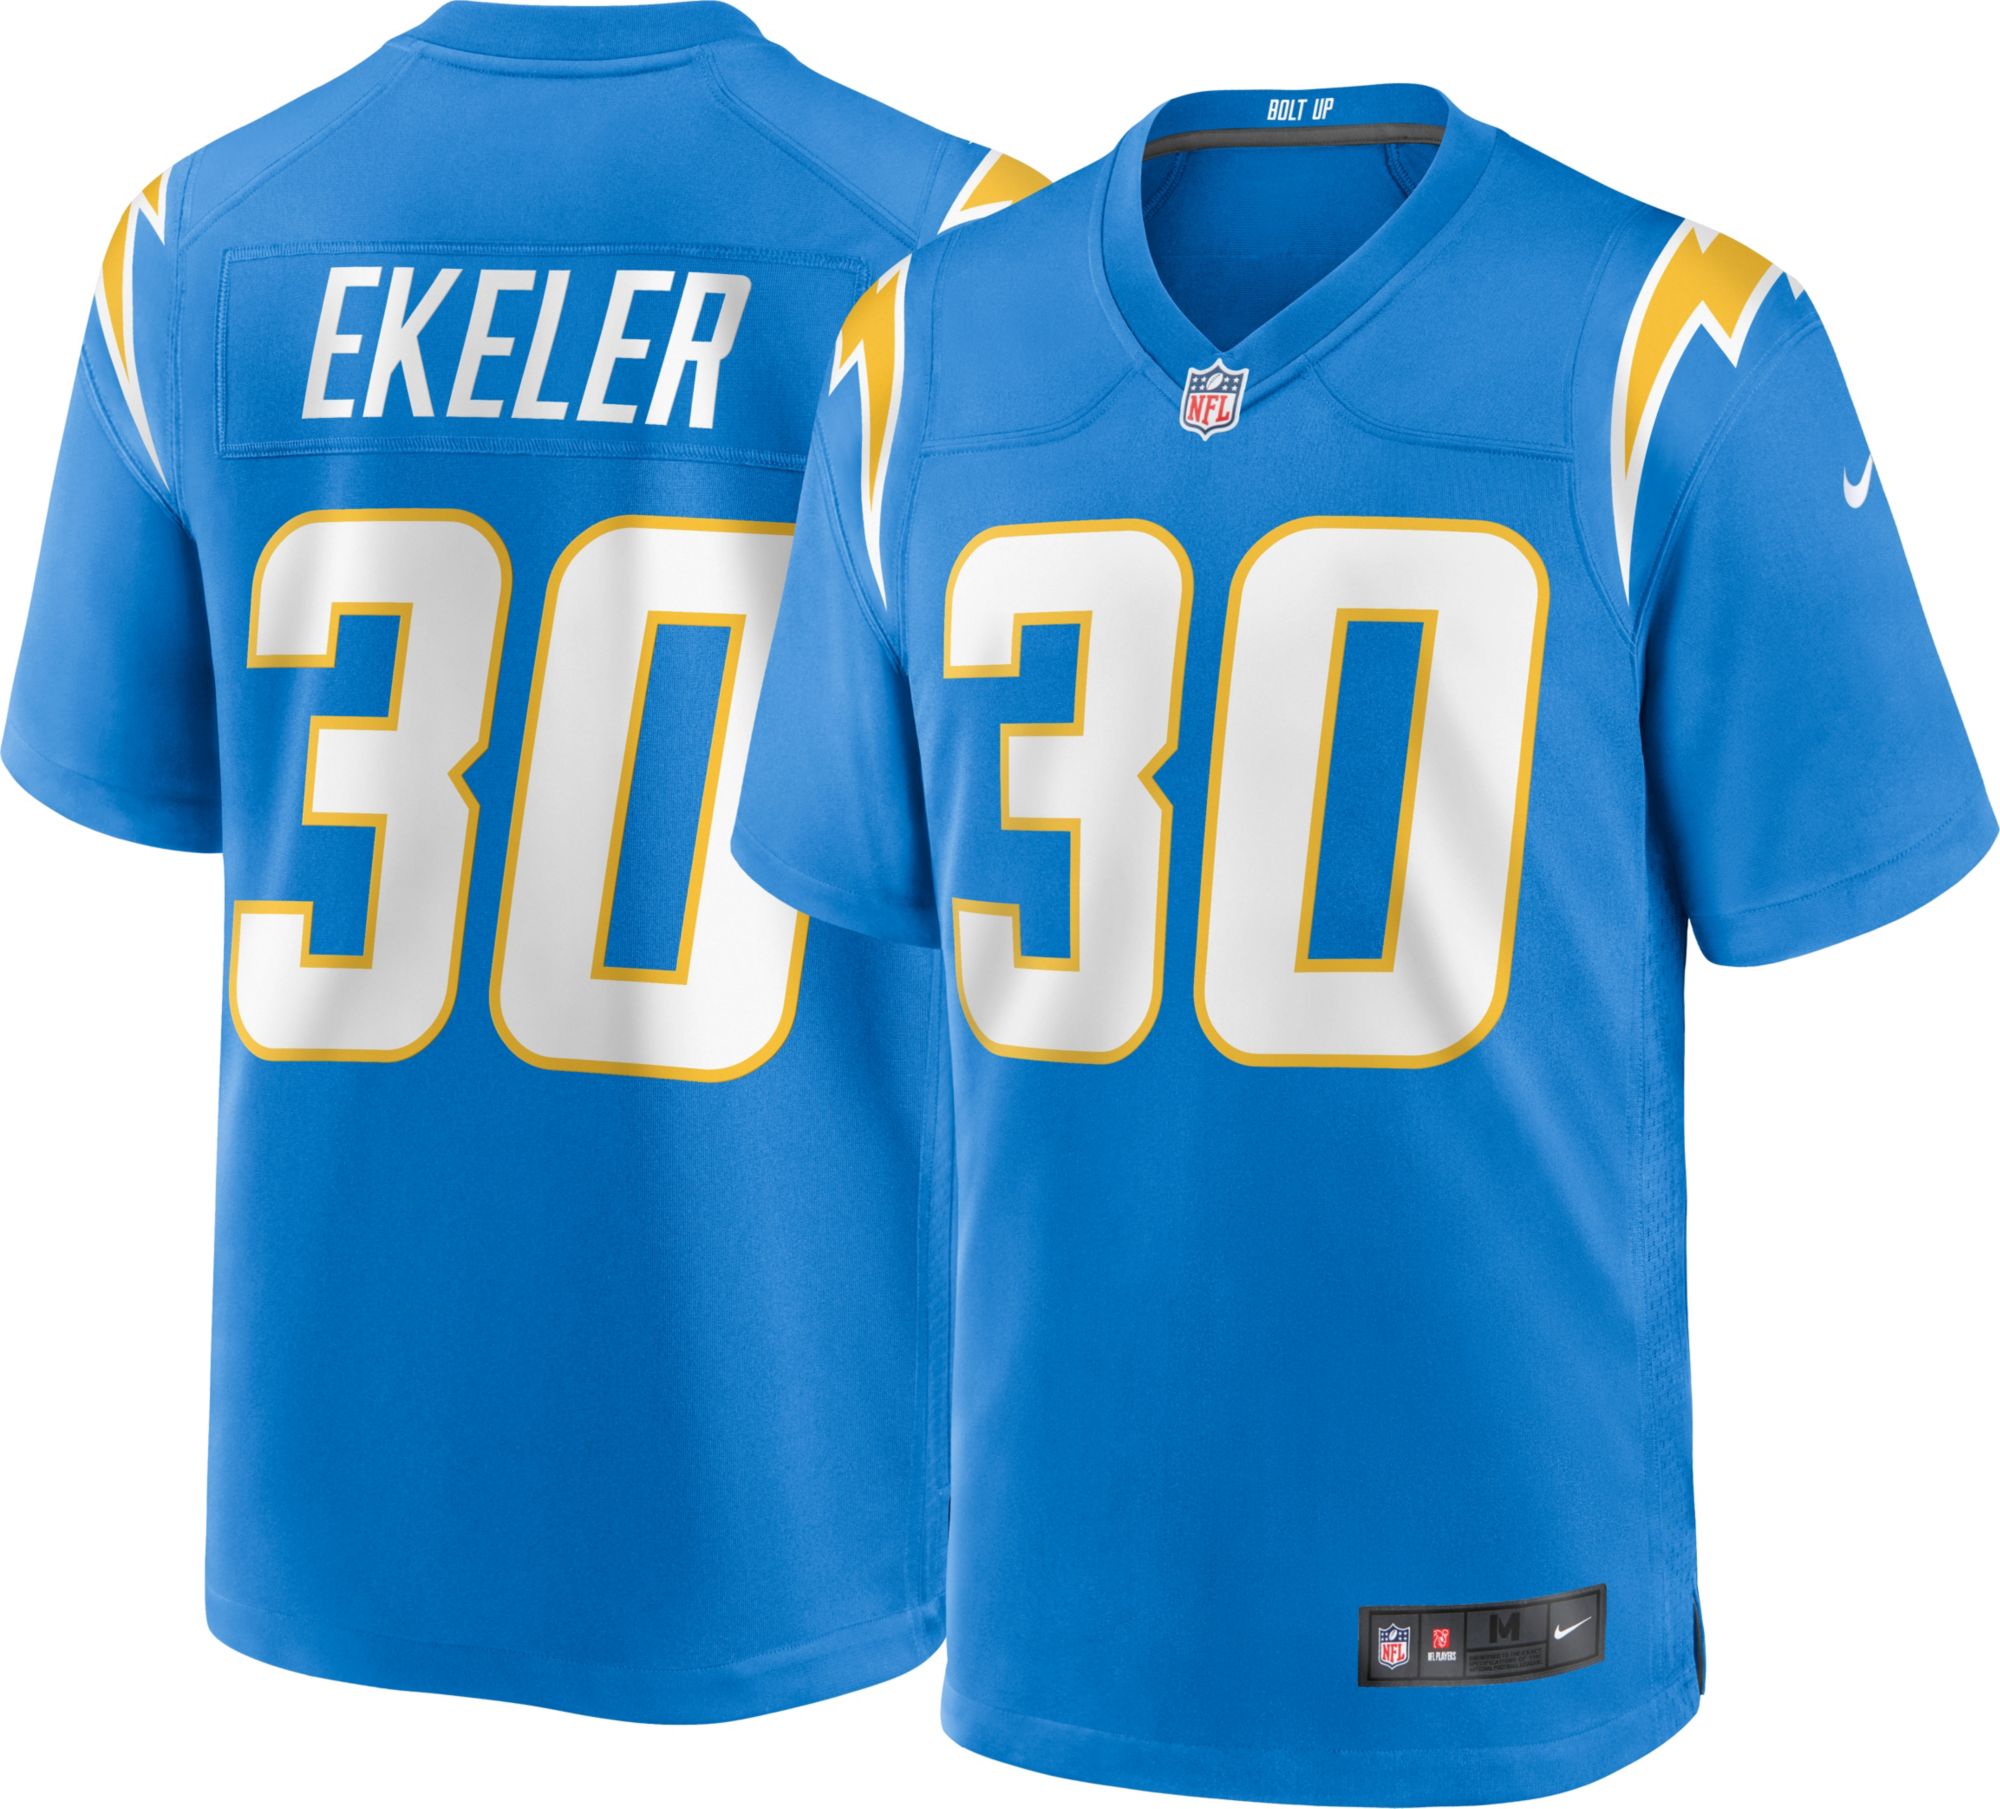 NFL_Jerseys Jersey Los Angeles''Chargers'' #97 Joey Bosa 17 Philip